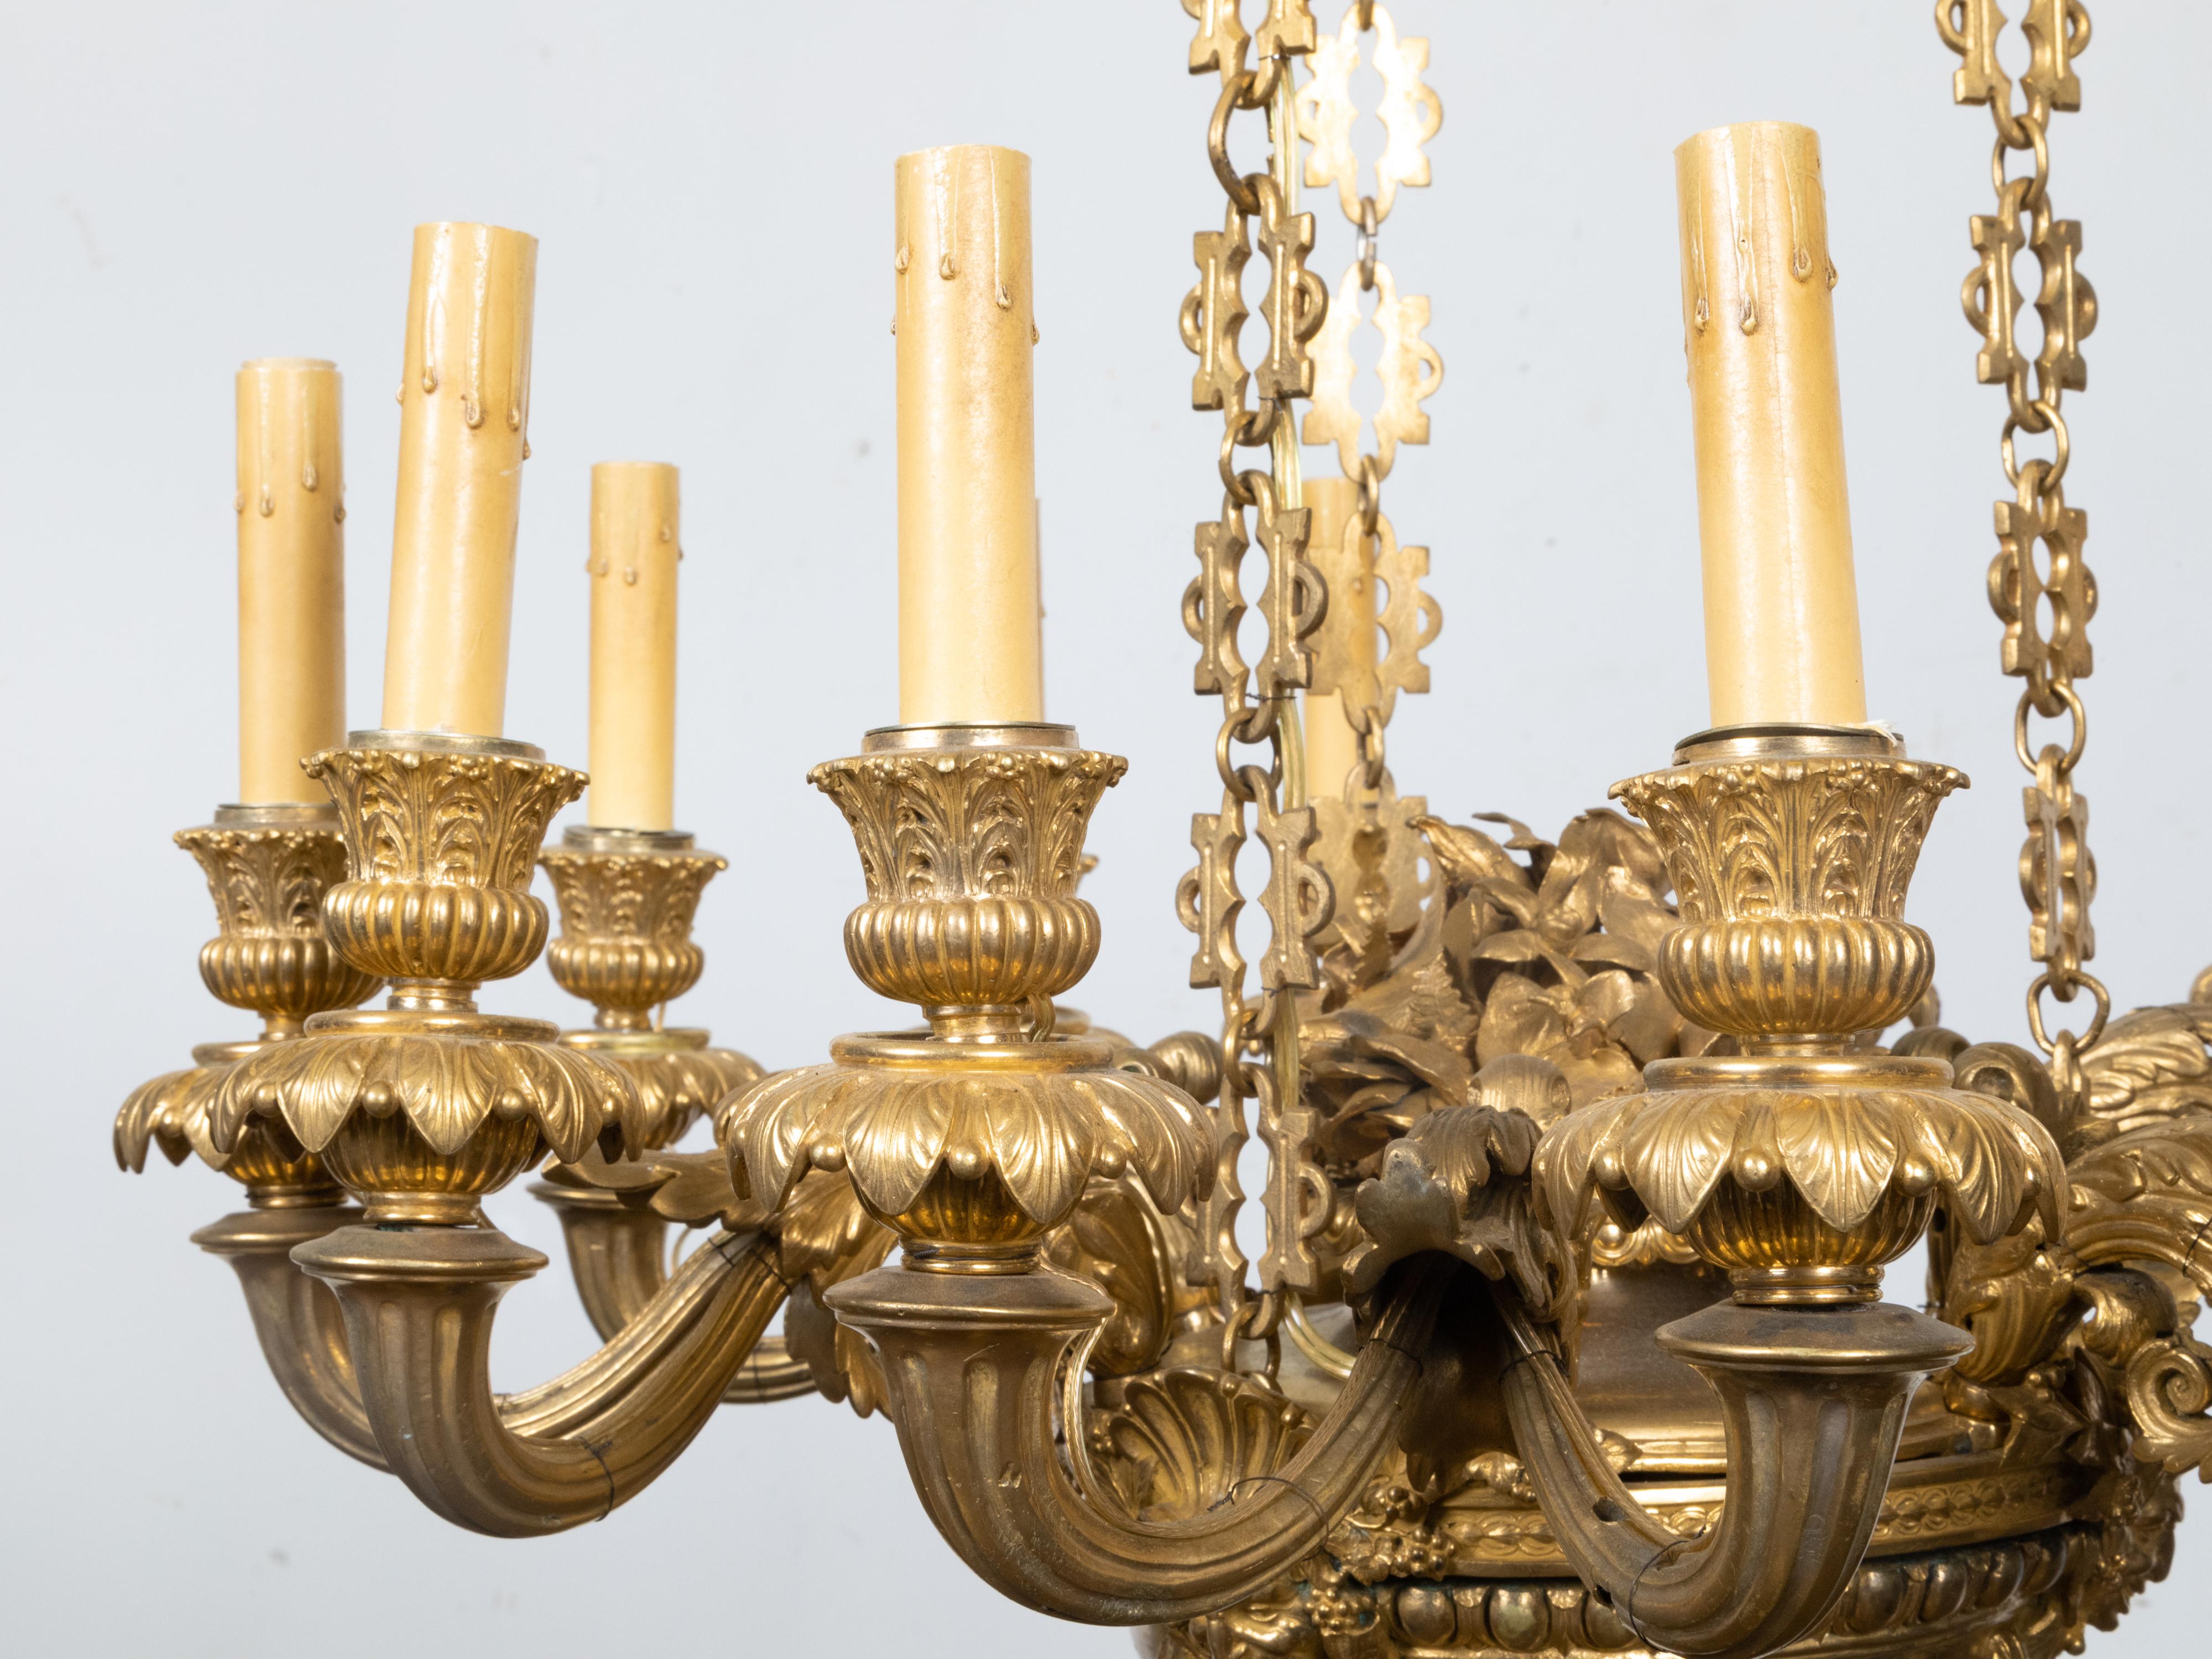 French Napoléon III 19th Century Gilt Bronze 12 Light Chandelier with Mascarons For Sale 12